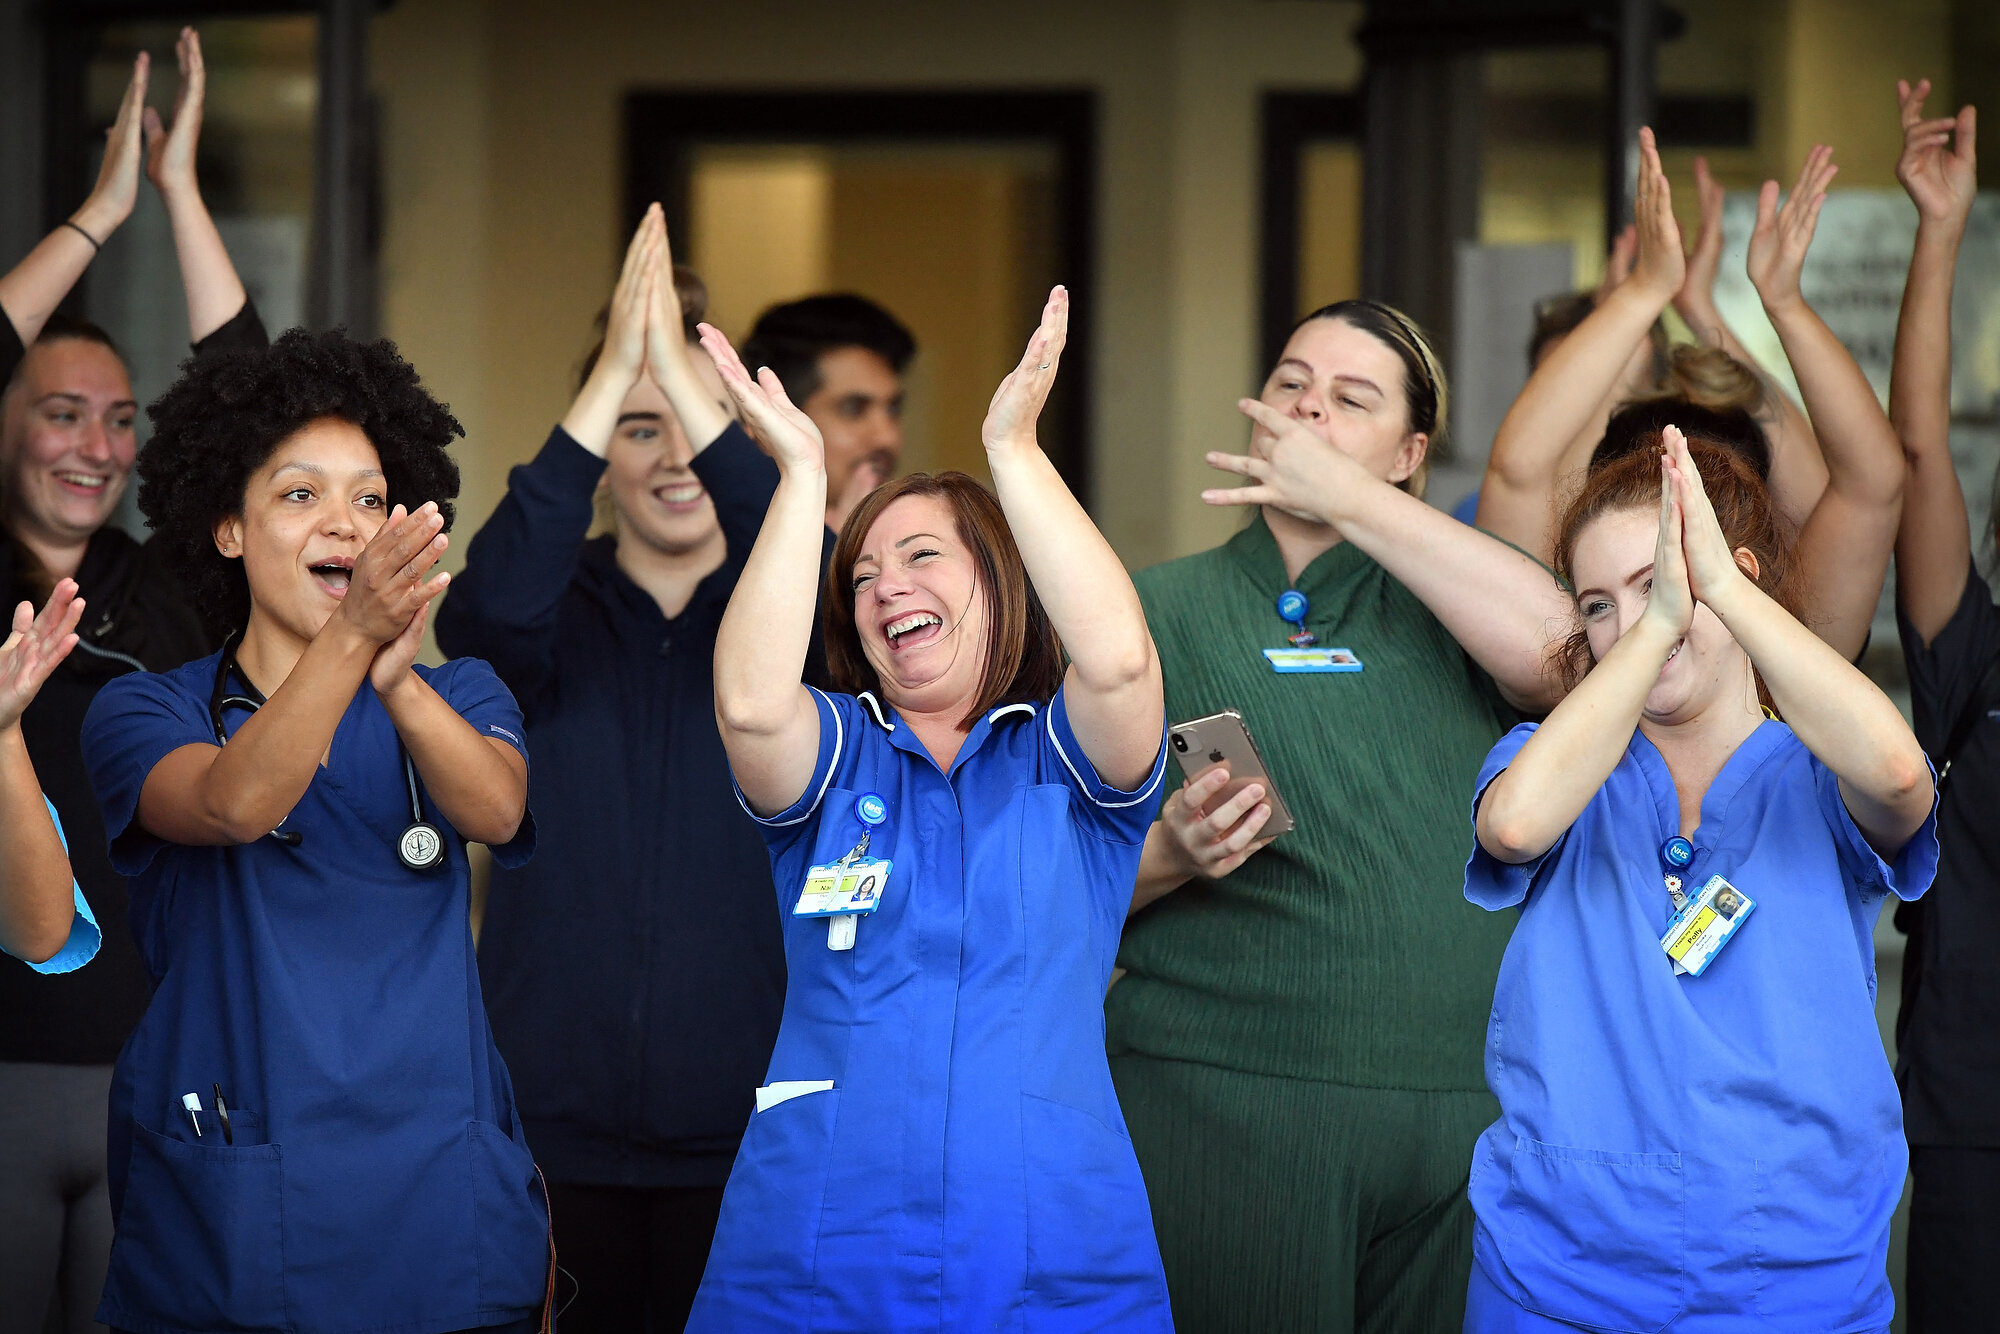  NHS workers at Aintree University Hospital in Liverpool participate in a national "clap for carers" to show thanks for the work of Britain's NHS and other frontline medical staff around the country as they battle with the novel coronavirus pandemic.